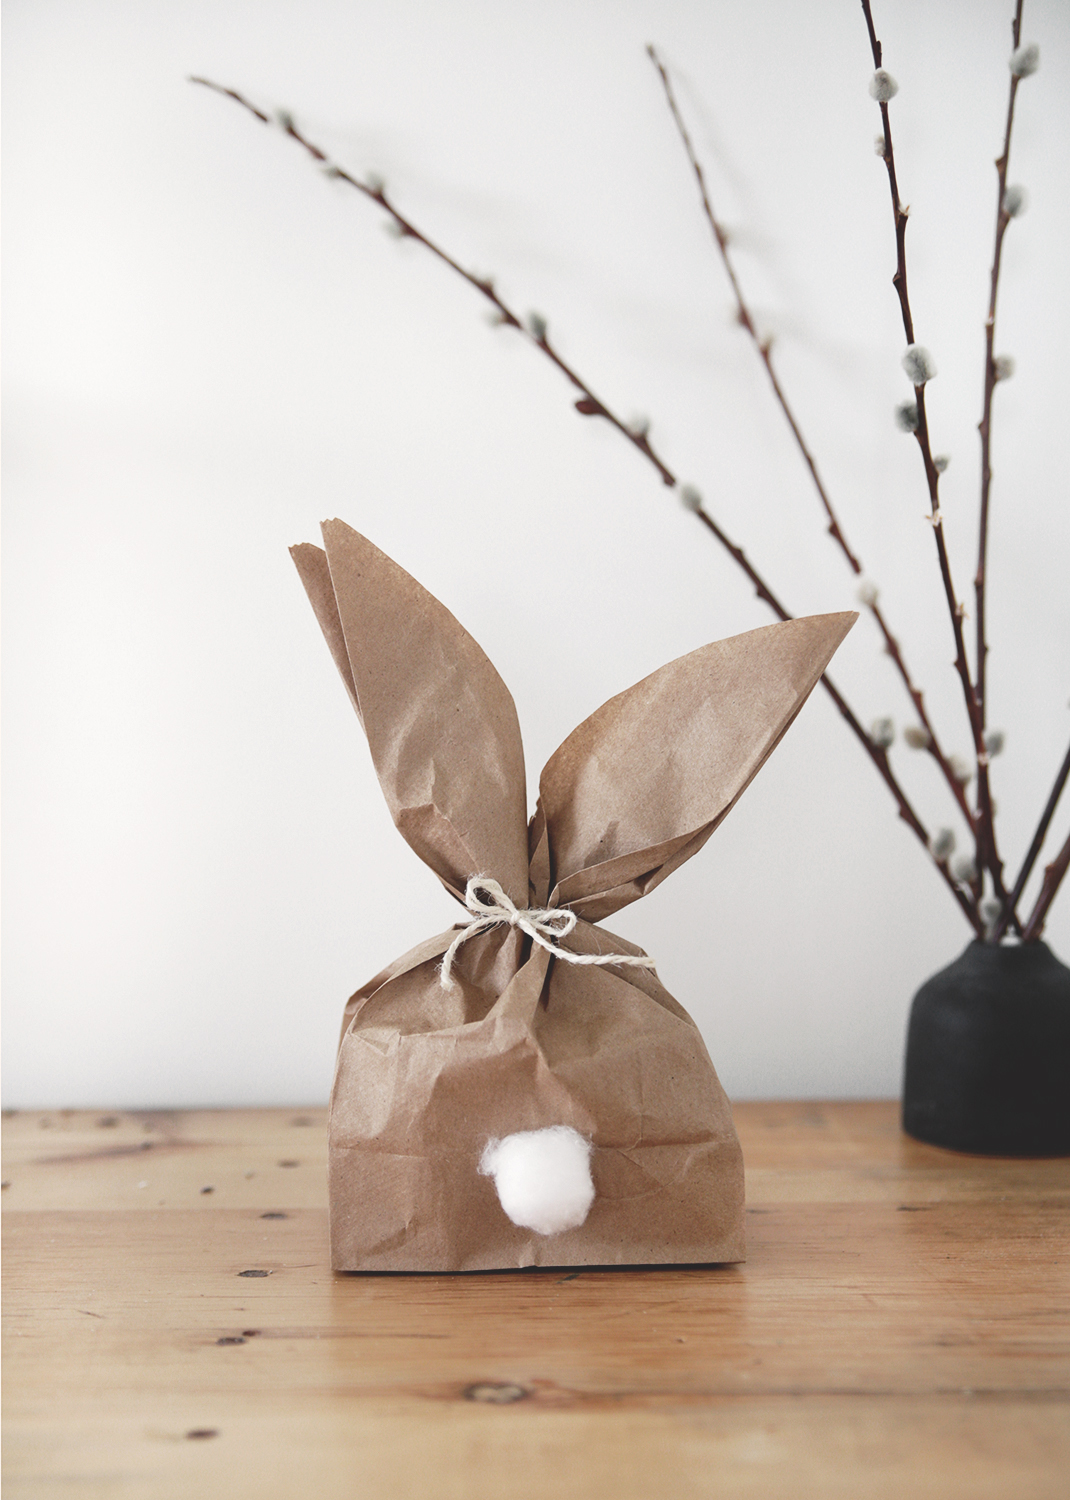 How to make Easy Paper Bag, Bunny Paper Bag